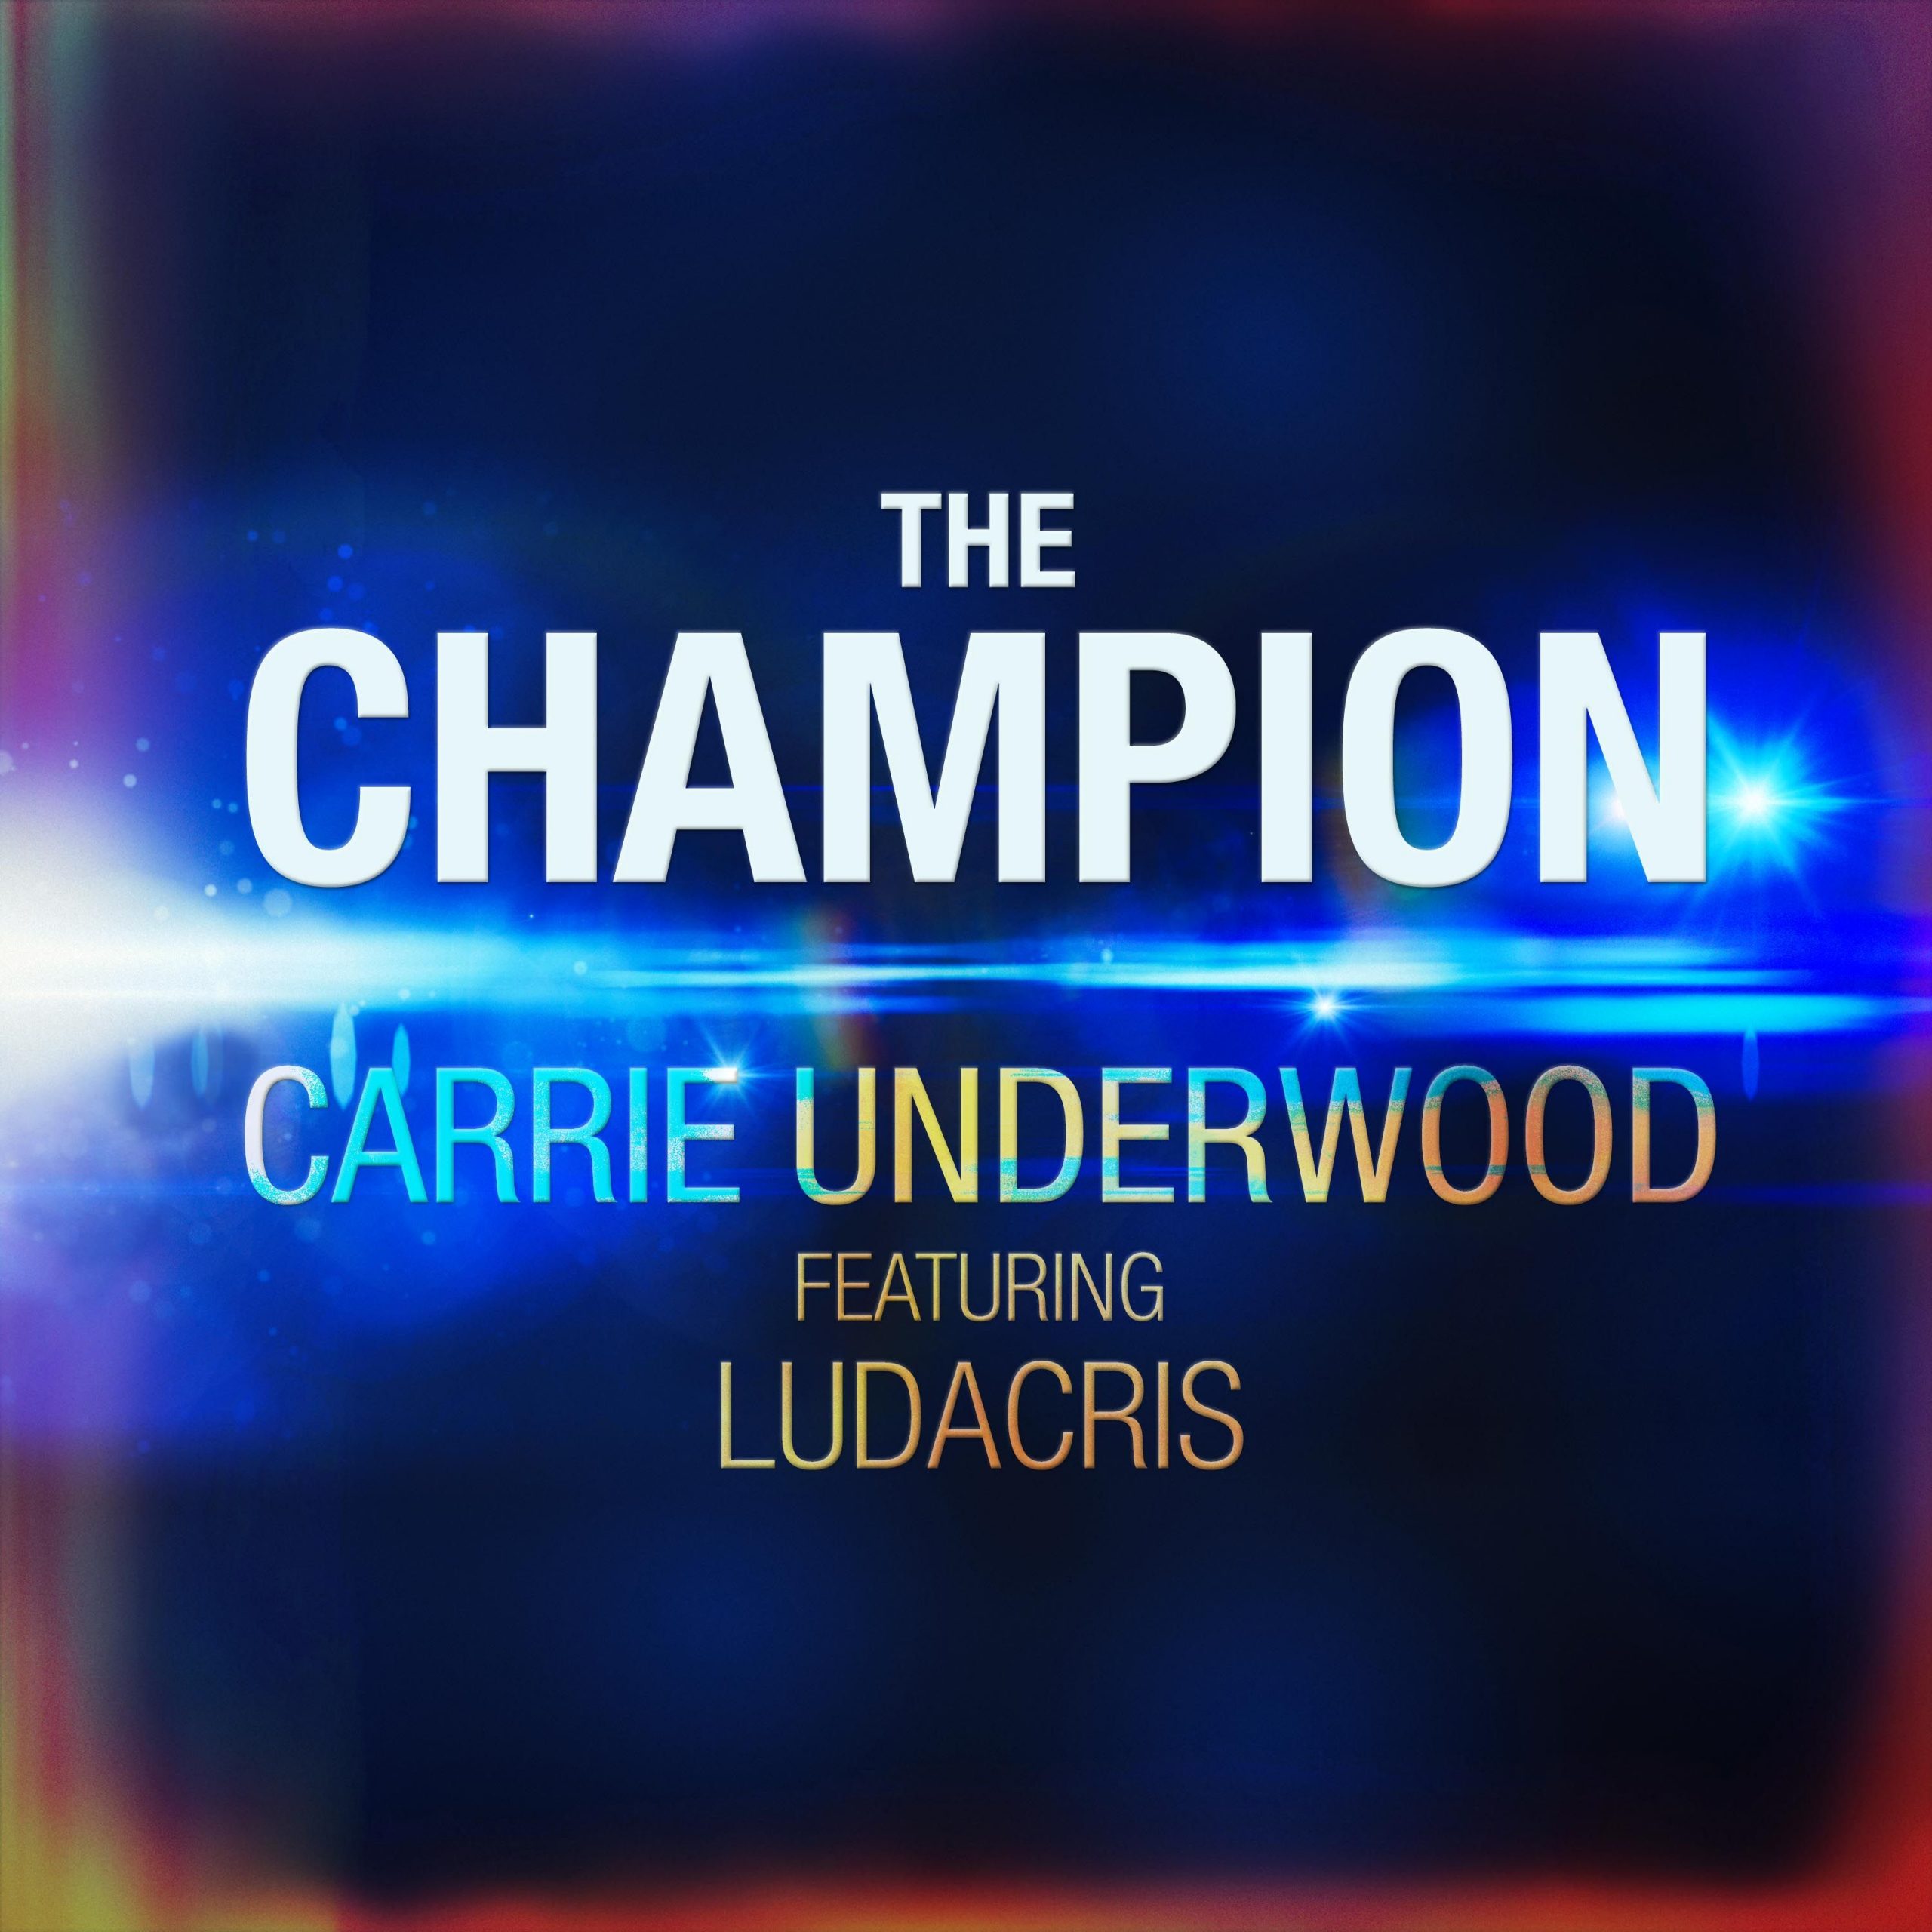 CARRIE UNDERWOOD AND LUDACRIS RELEASE NEW MUSIC VIDEO FOR “THE CHAMPION”